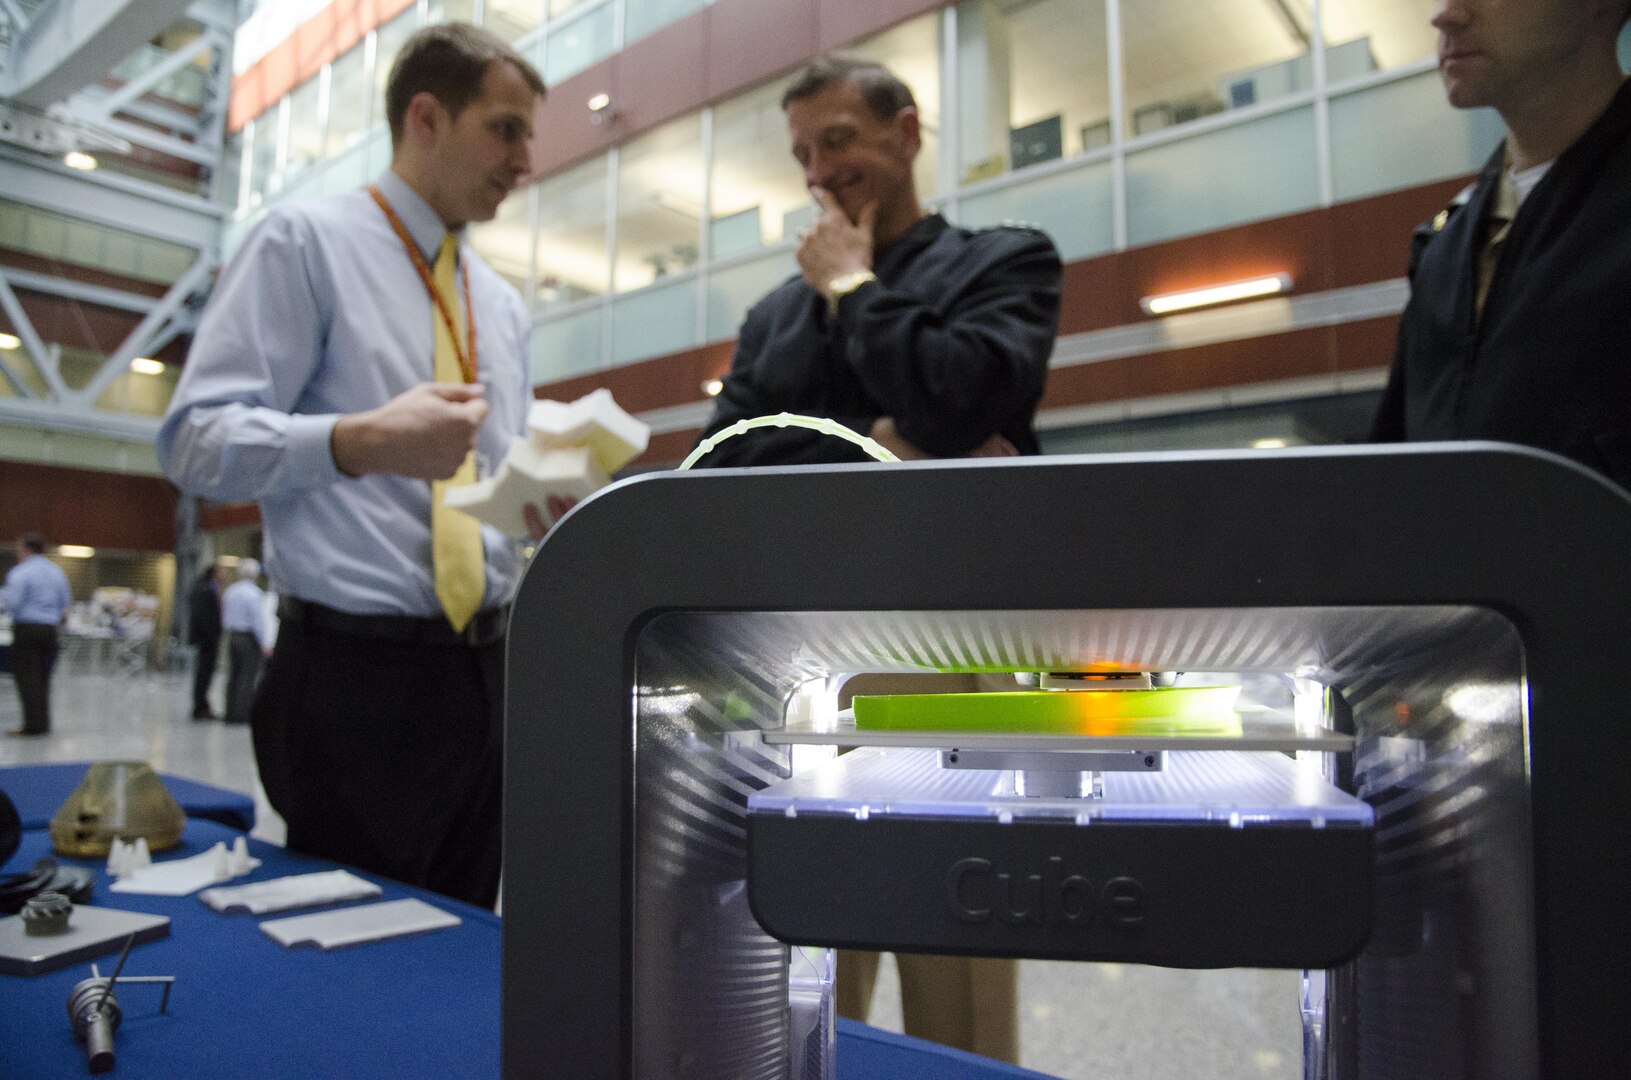 Ben Bouffard, an engineer representing additive manufacturing (AM) technology at Naval Surface Warfare Center, Carderock Division, talks to Vice Adm. William Hilarides, commander, Naval Sea Systems Command, during Carderock Day at the Washington Navy Yard, March 23,
2016. In the foreground a 3-D printer creates a model ship. (U.S. Navy photo by Monica McCoy/Released)